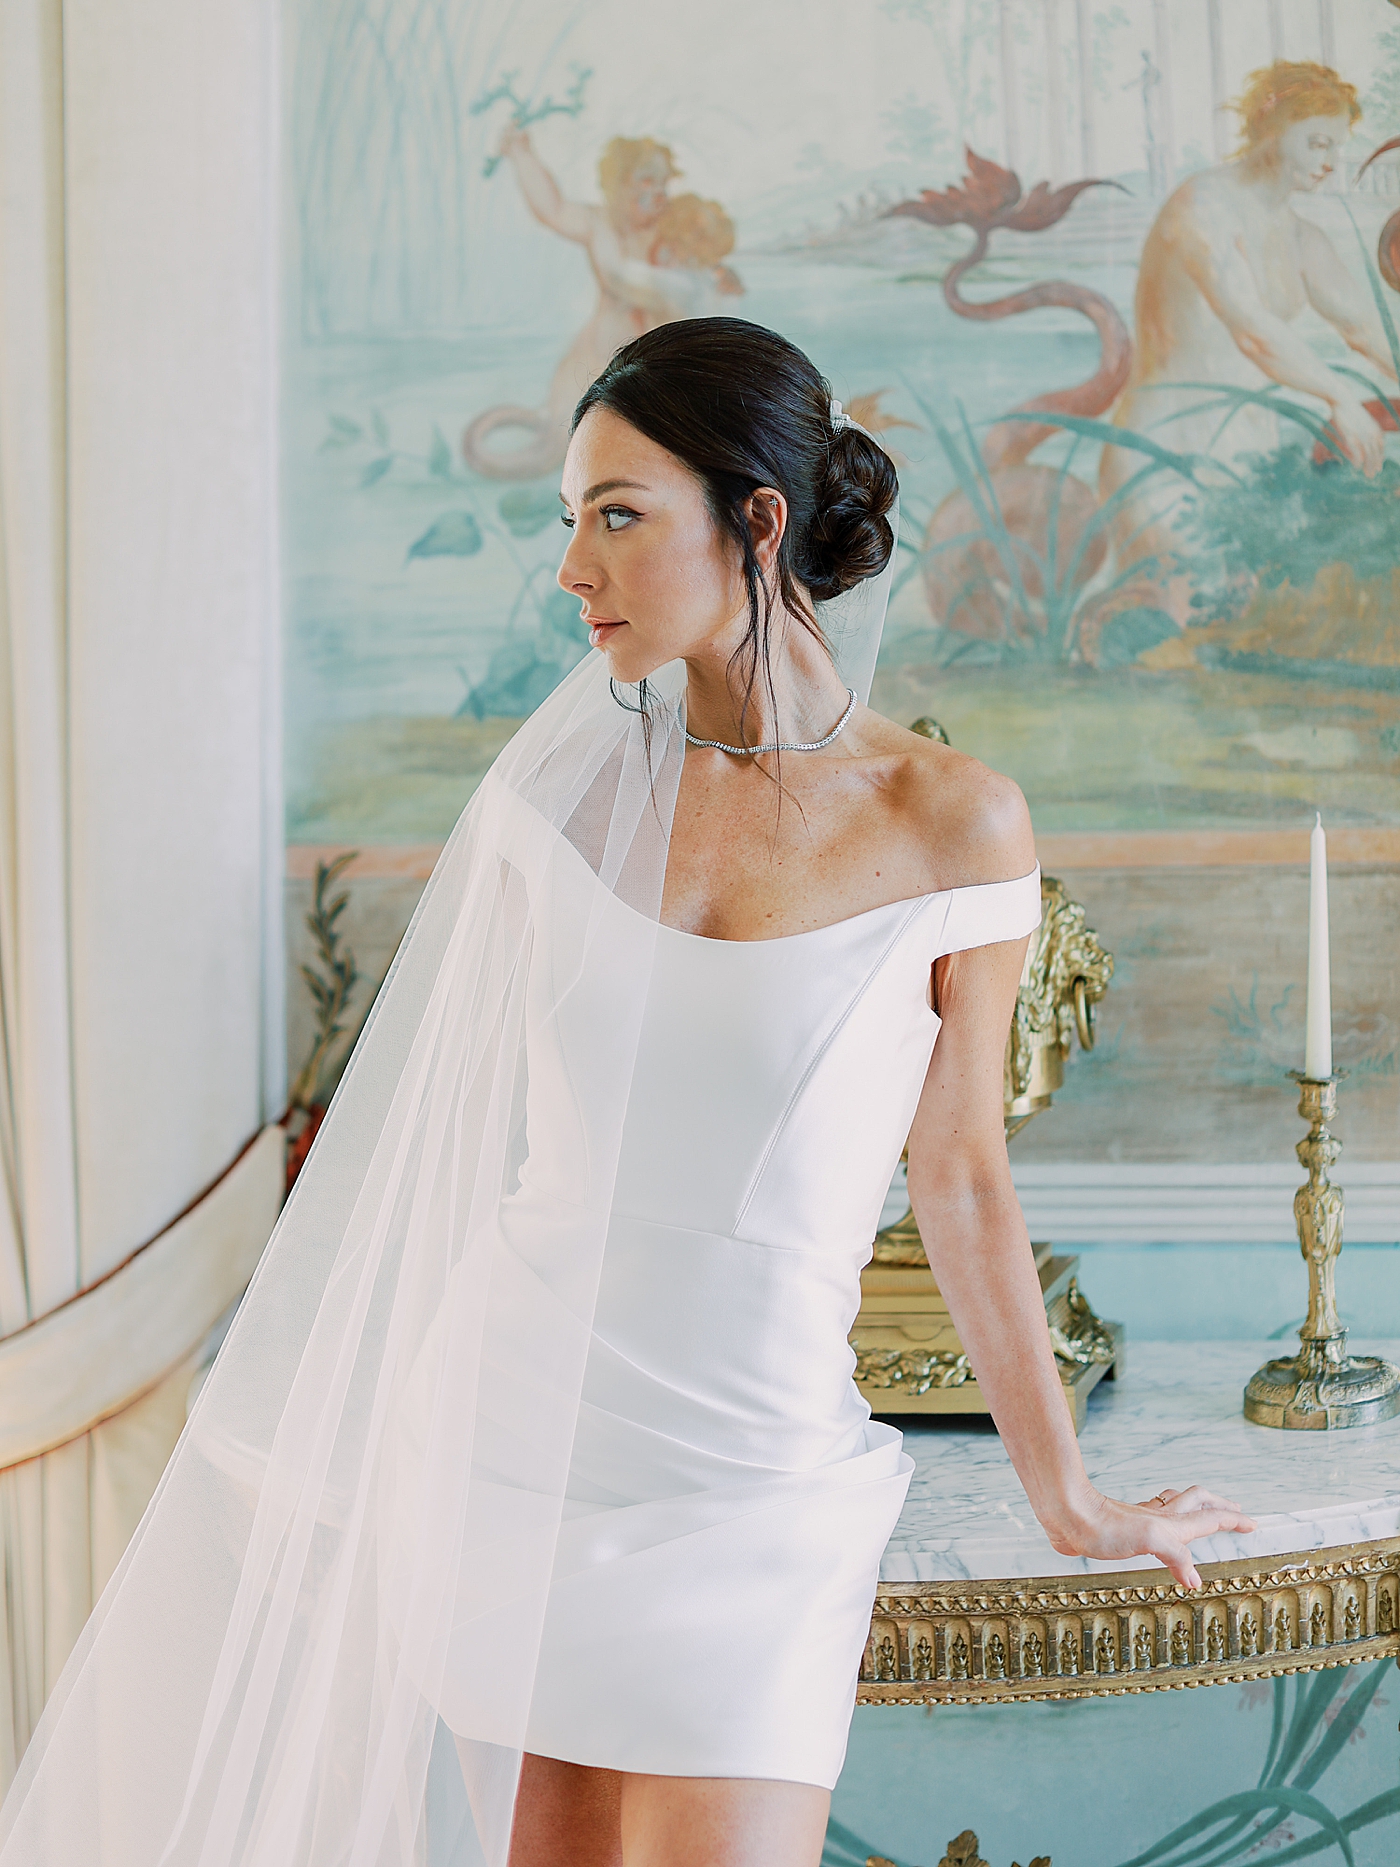 Bride in a reception dress and veil leaning on a table | Image by Diane Sotero Photography